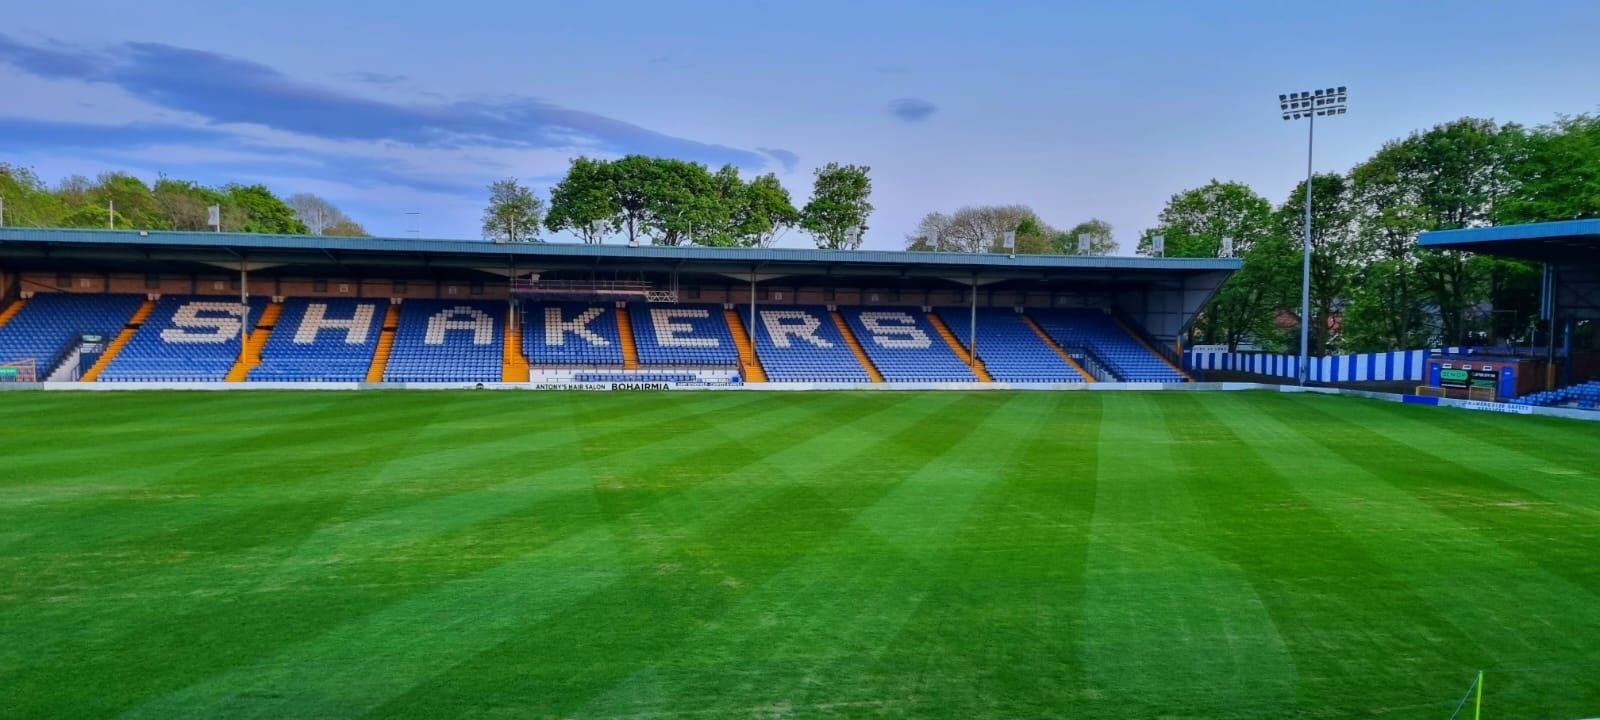 More information about "Secretary Update from the Football Supporters' Society of Bury"